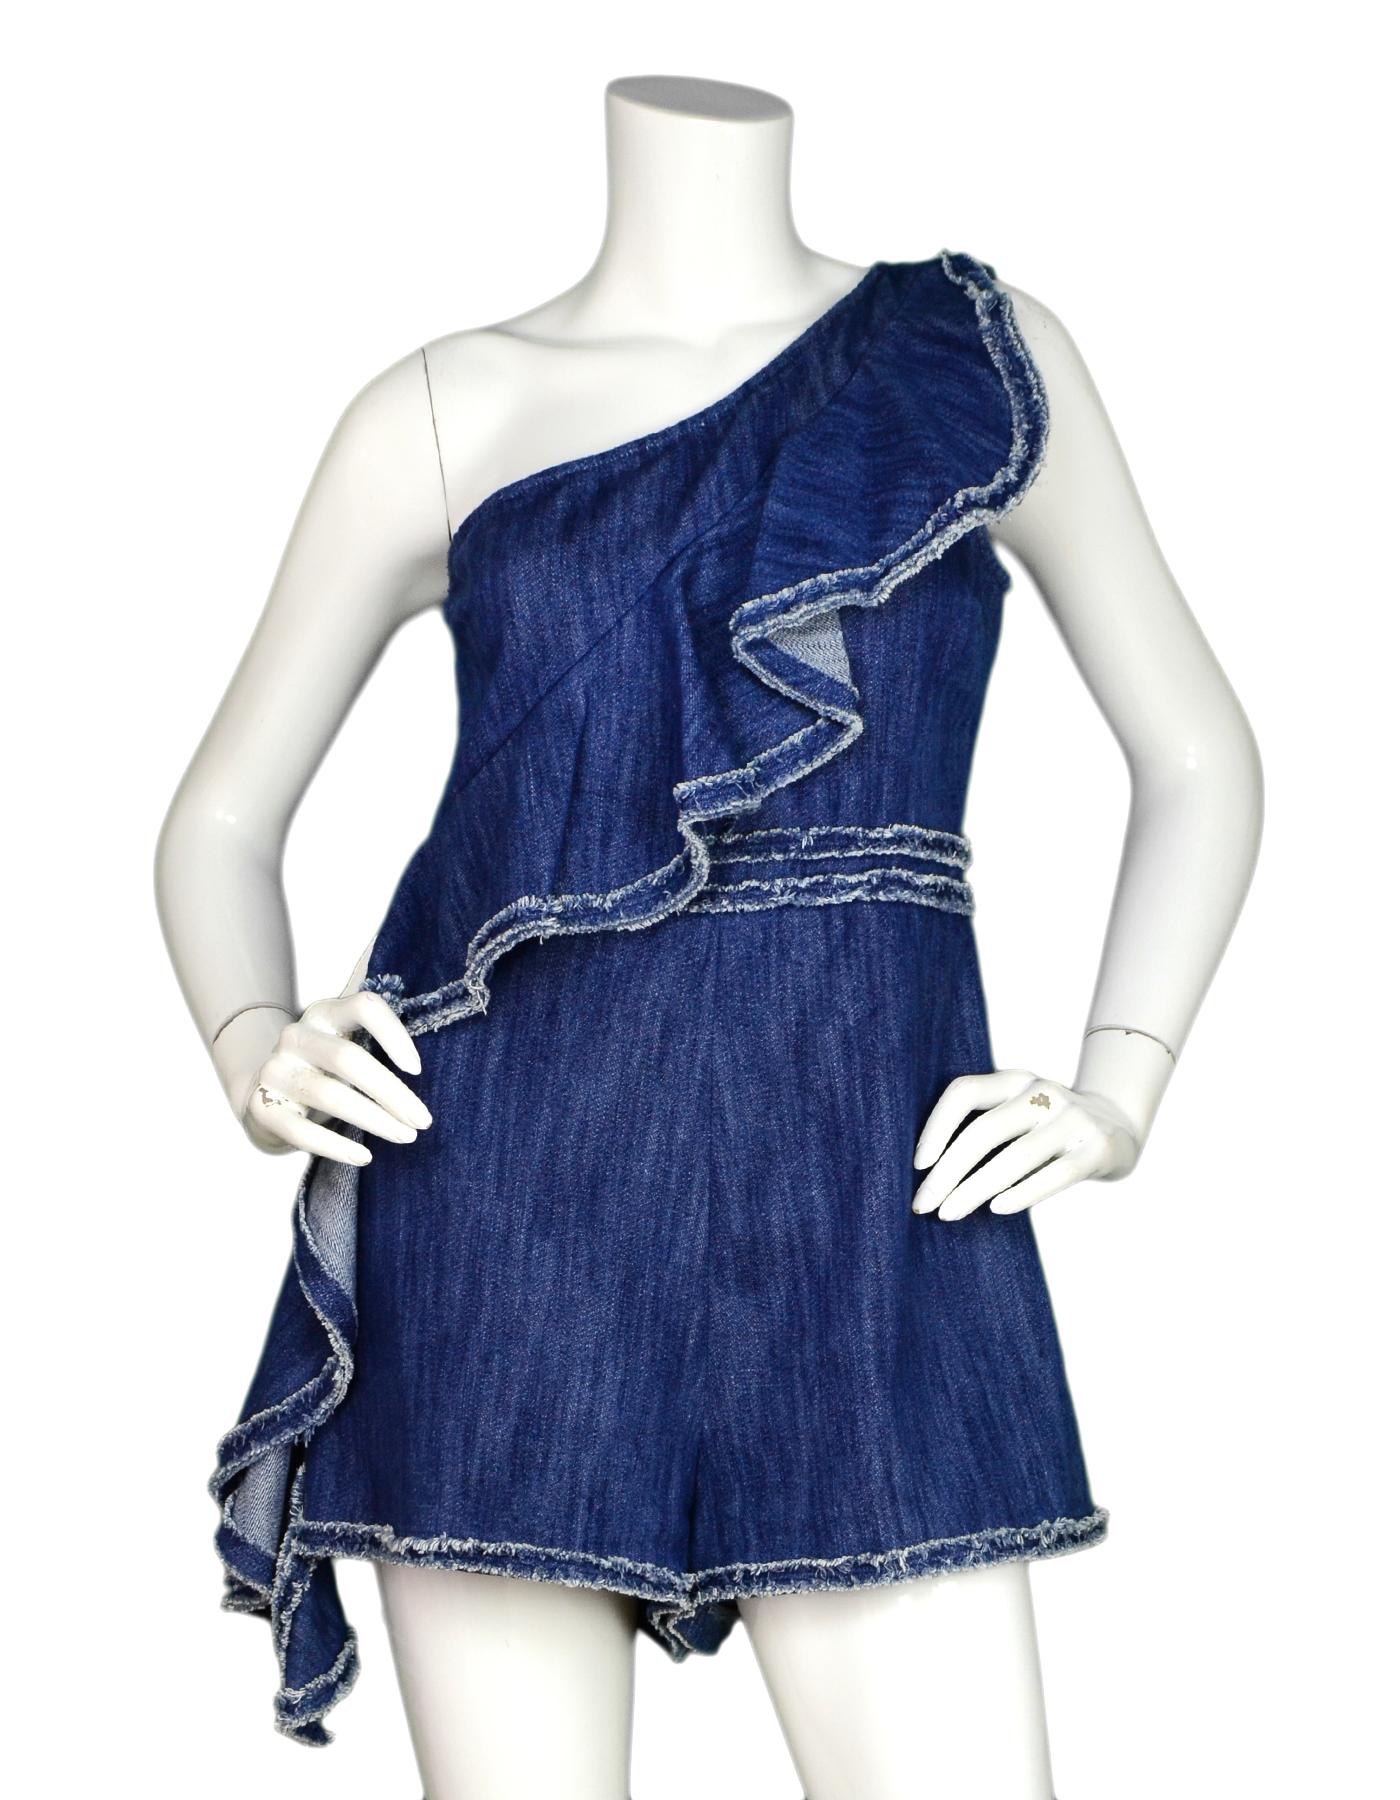 Alexis Blue Denim One Shoulder Asymmetrical Ruffle Blakely Jumper/Romper Sz L NWT

Made In:  China
Color: Blue
Materials: 100% cotton
Opening/Closure: Hidden side zipper
Overall Condition: Excellent condition with original tags attached 
Estimated